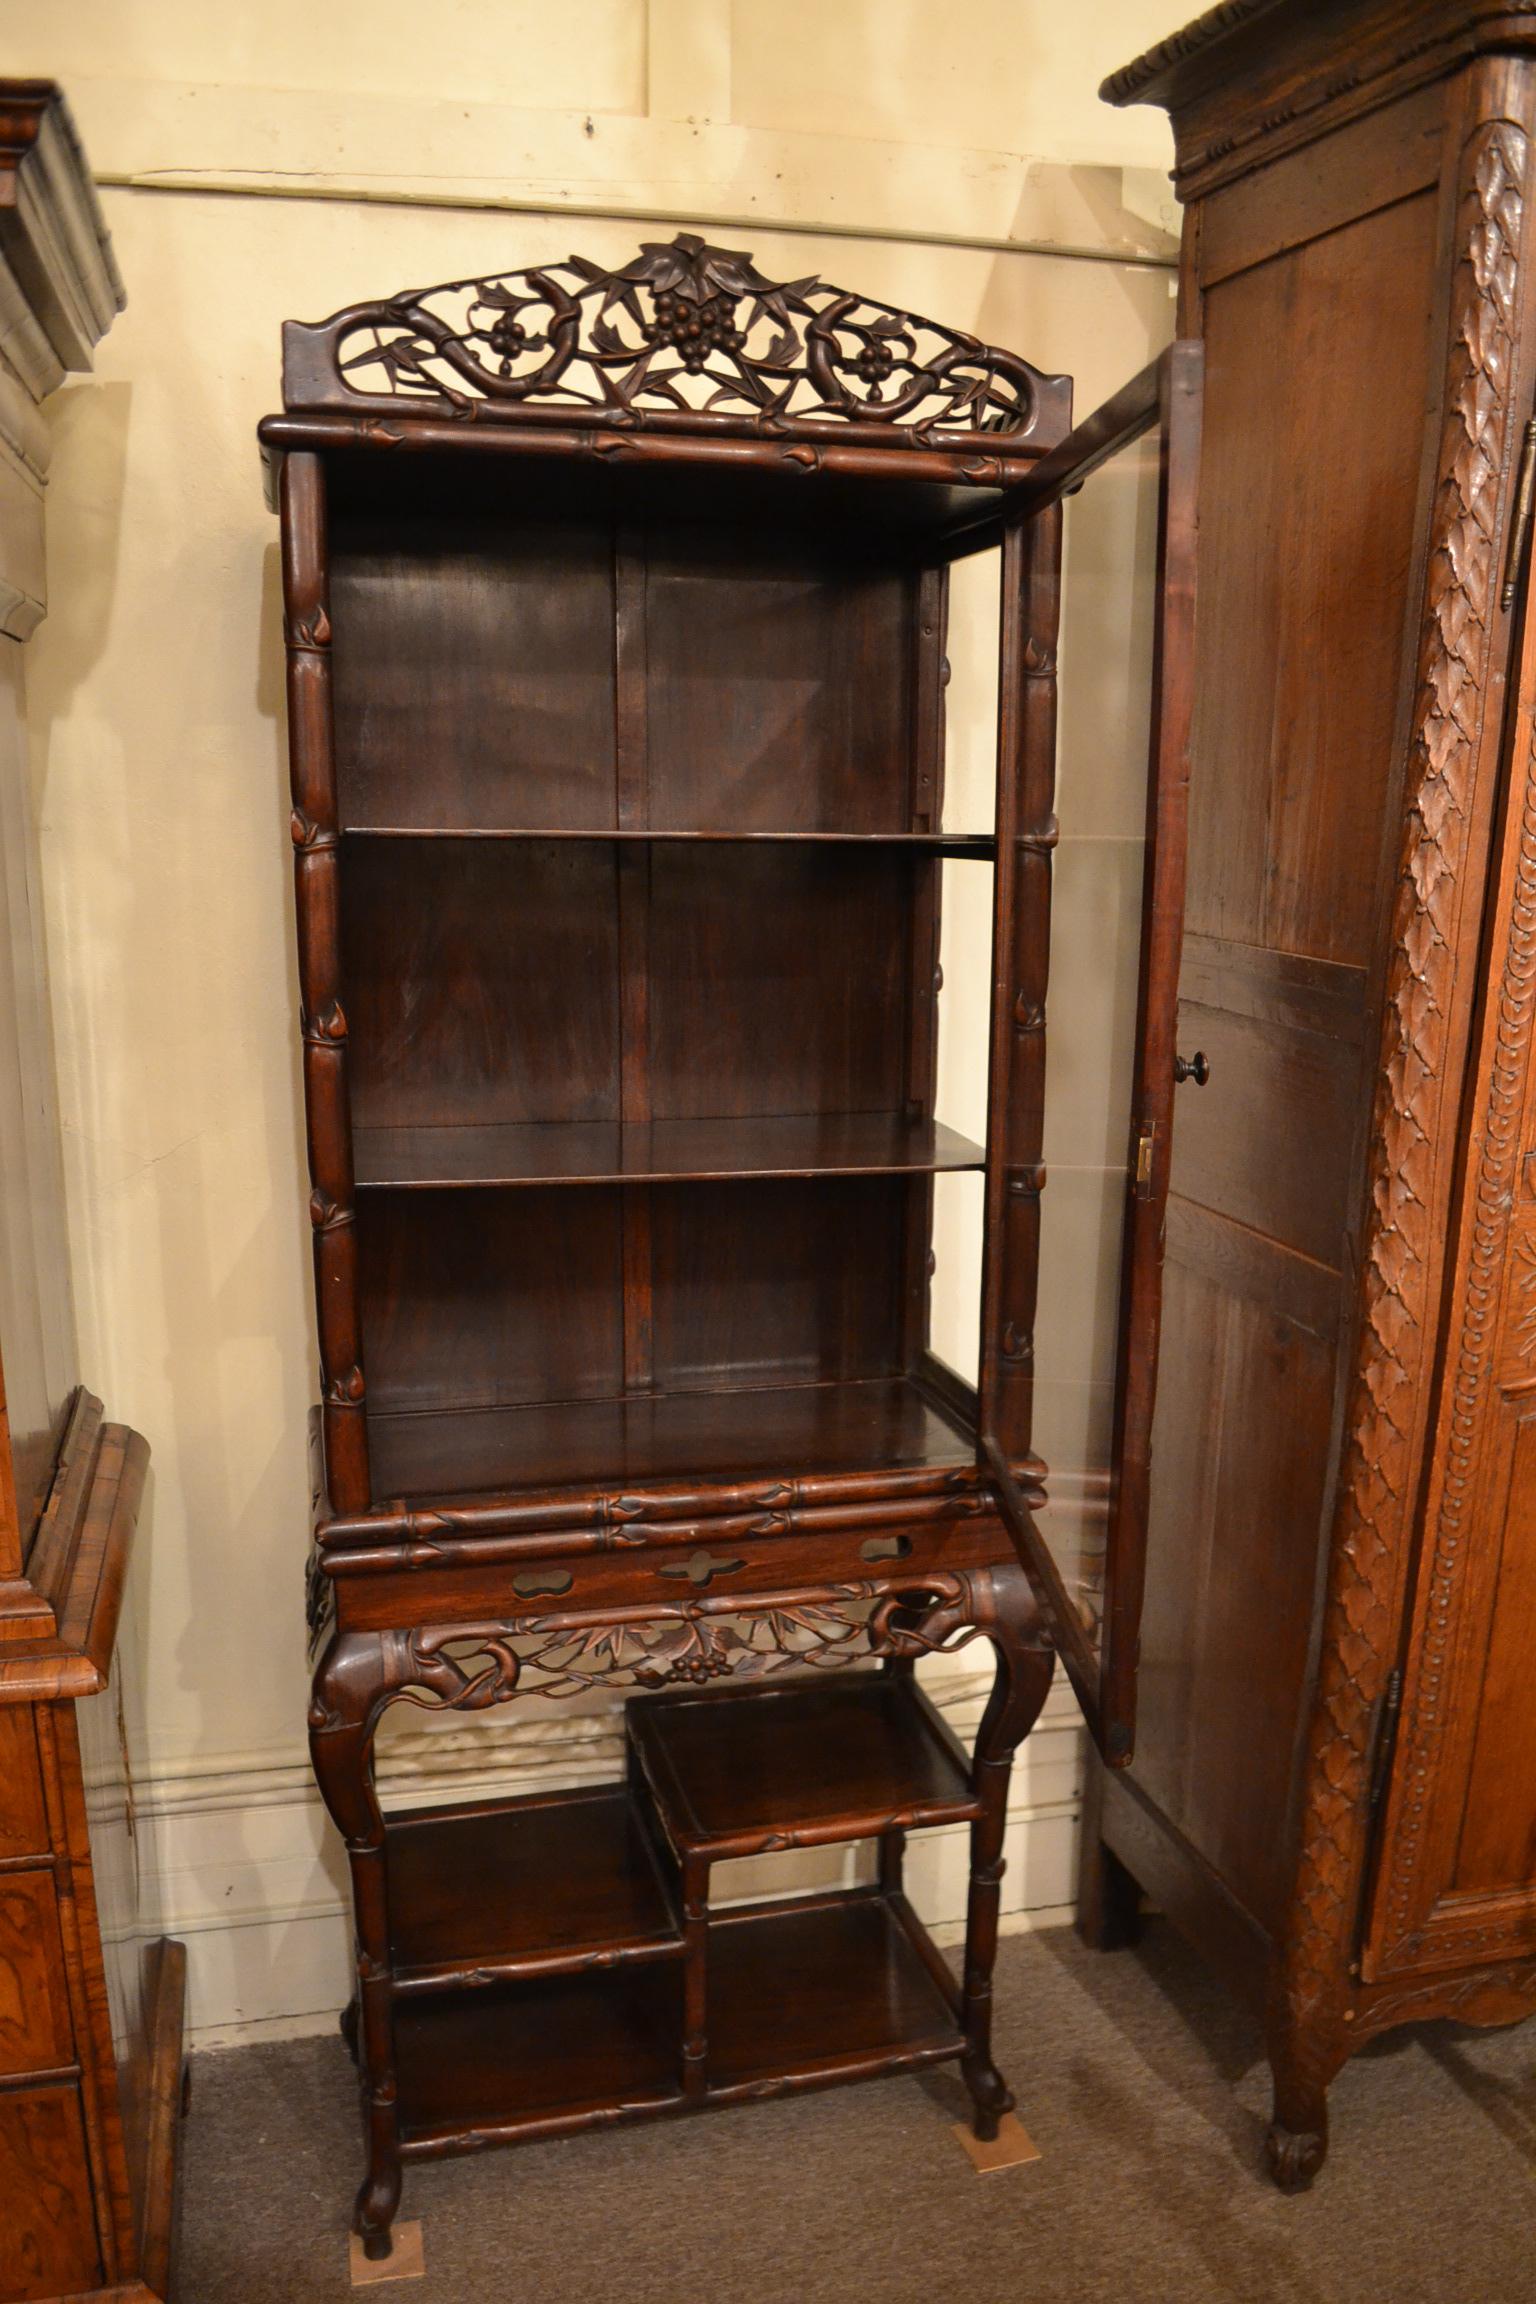 Antique Mid 19th Century Chinese Style Teakwood Display Cabinet. Small storage shelves below main body of cabinet. Glass door.
